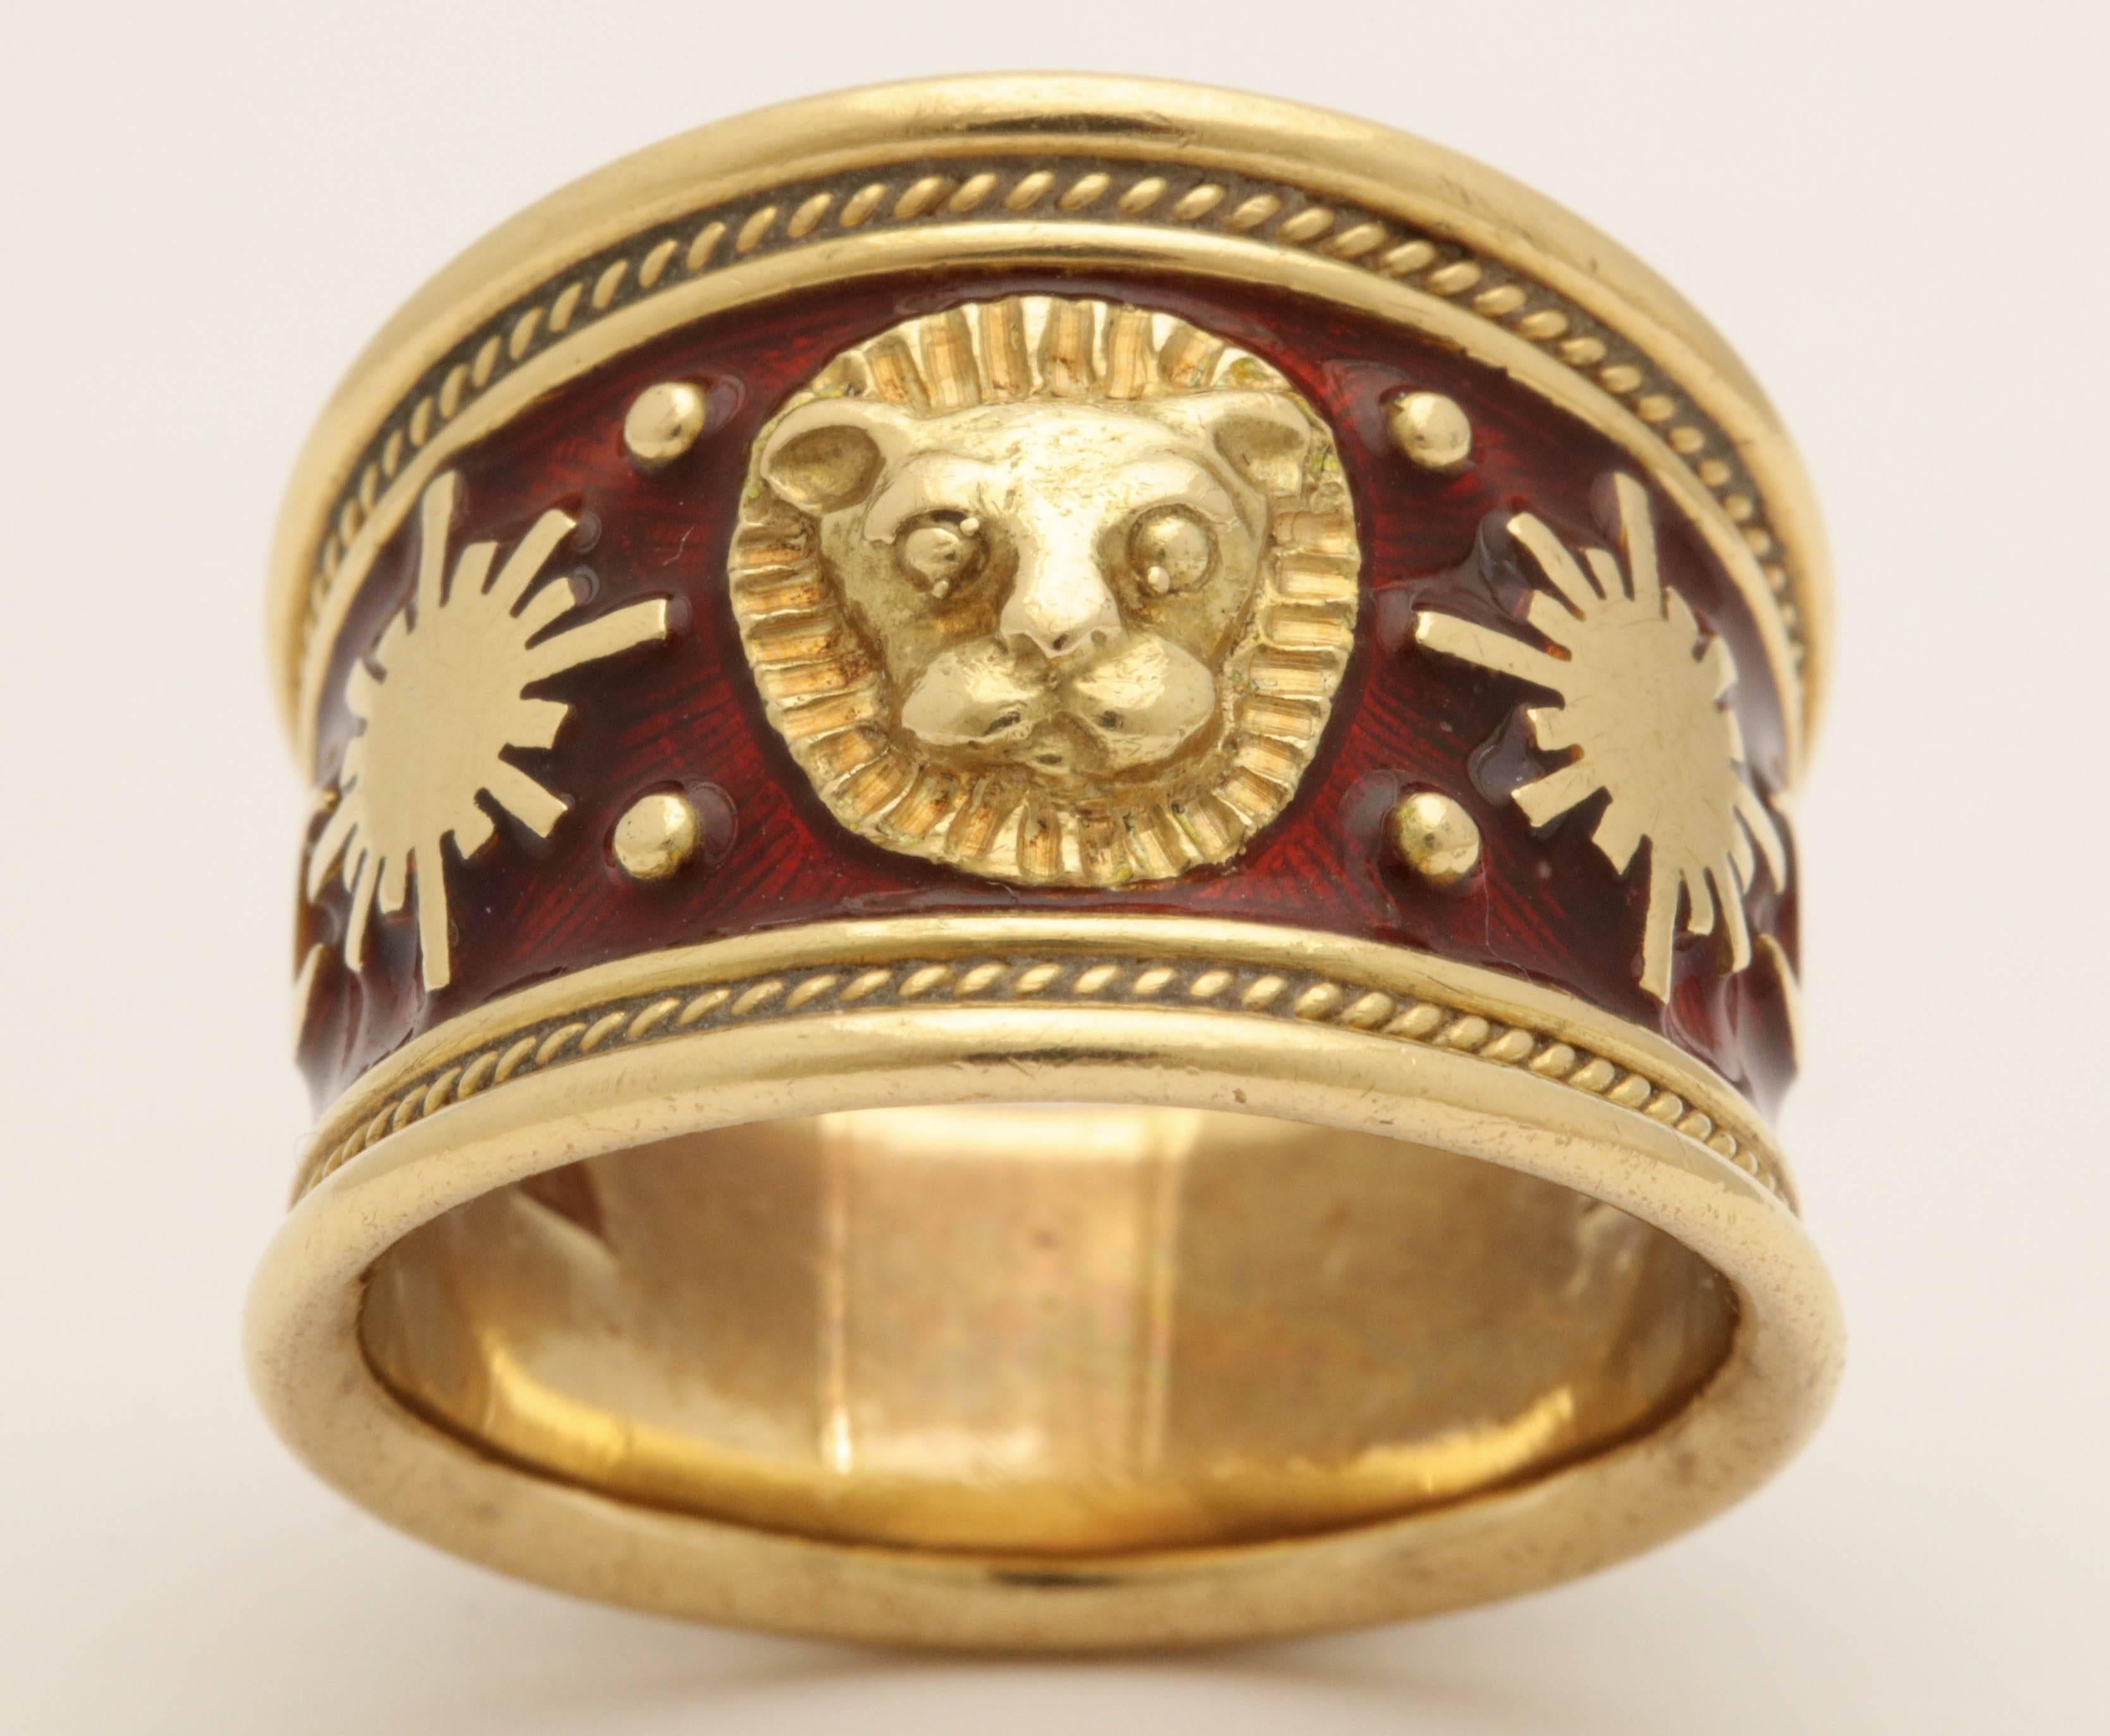 One Unisex Ring Designed In 18kt Yellow Gold With Starburst And Moon Details Centering A Leo The Lion Design Decal In The Center.The Tapered Band Is Further Embellished With Hard Red Guilloche Enamel And Borders Of Ring With A Beautiful Ridged Gold